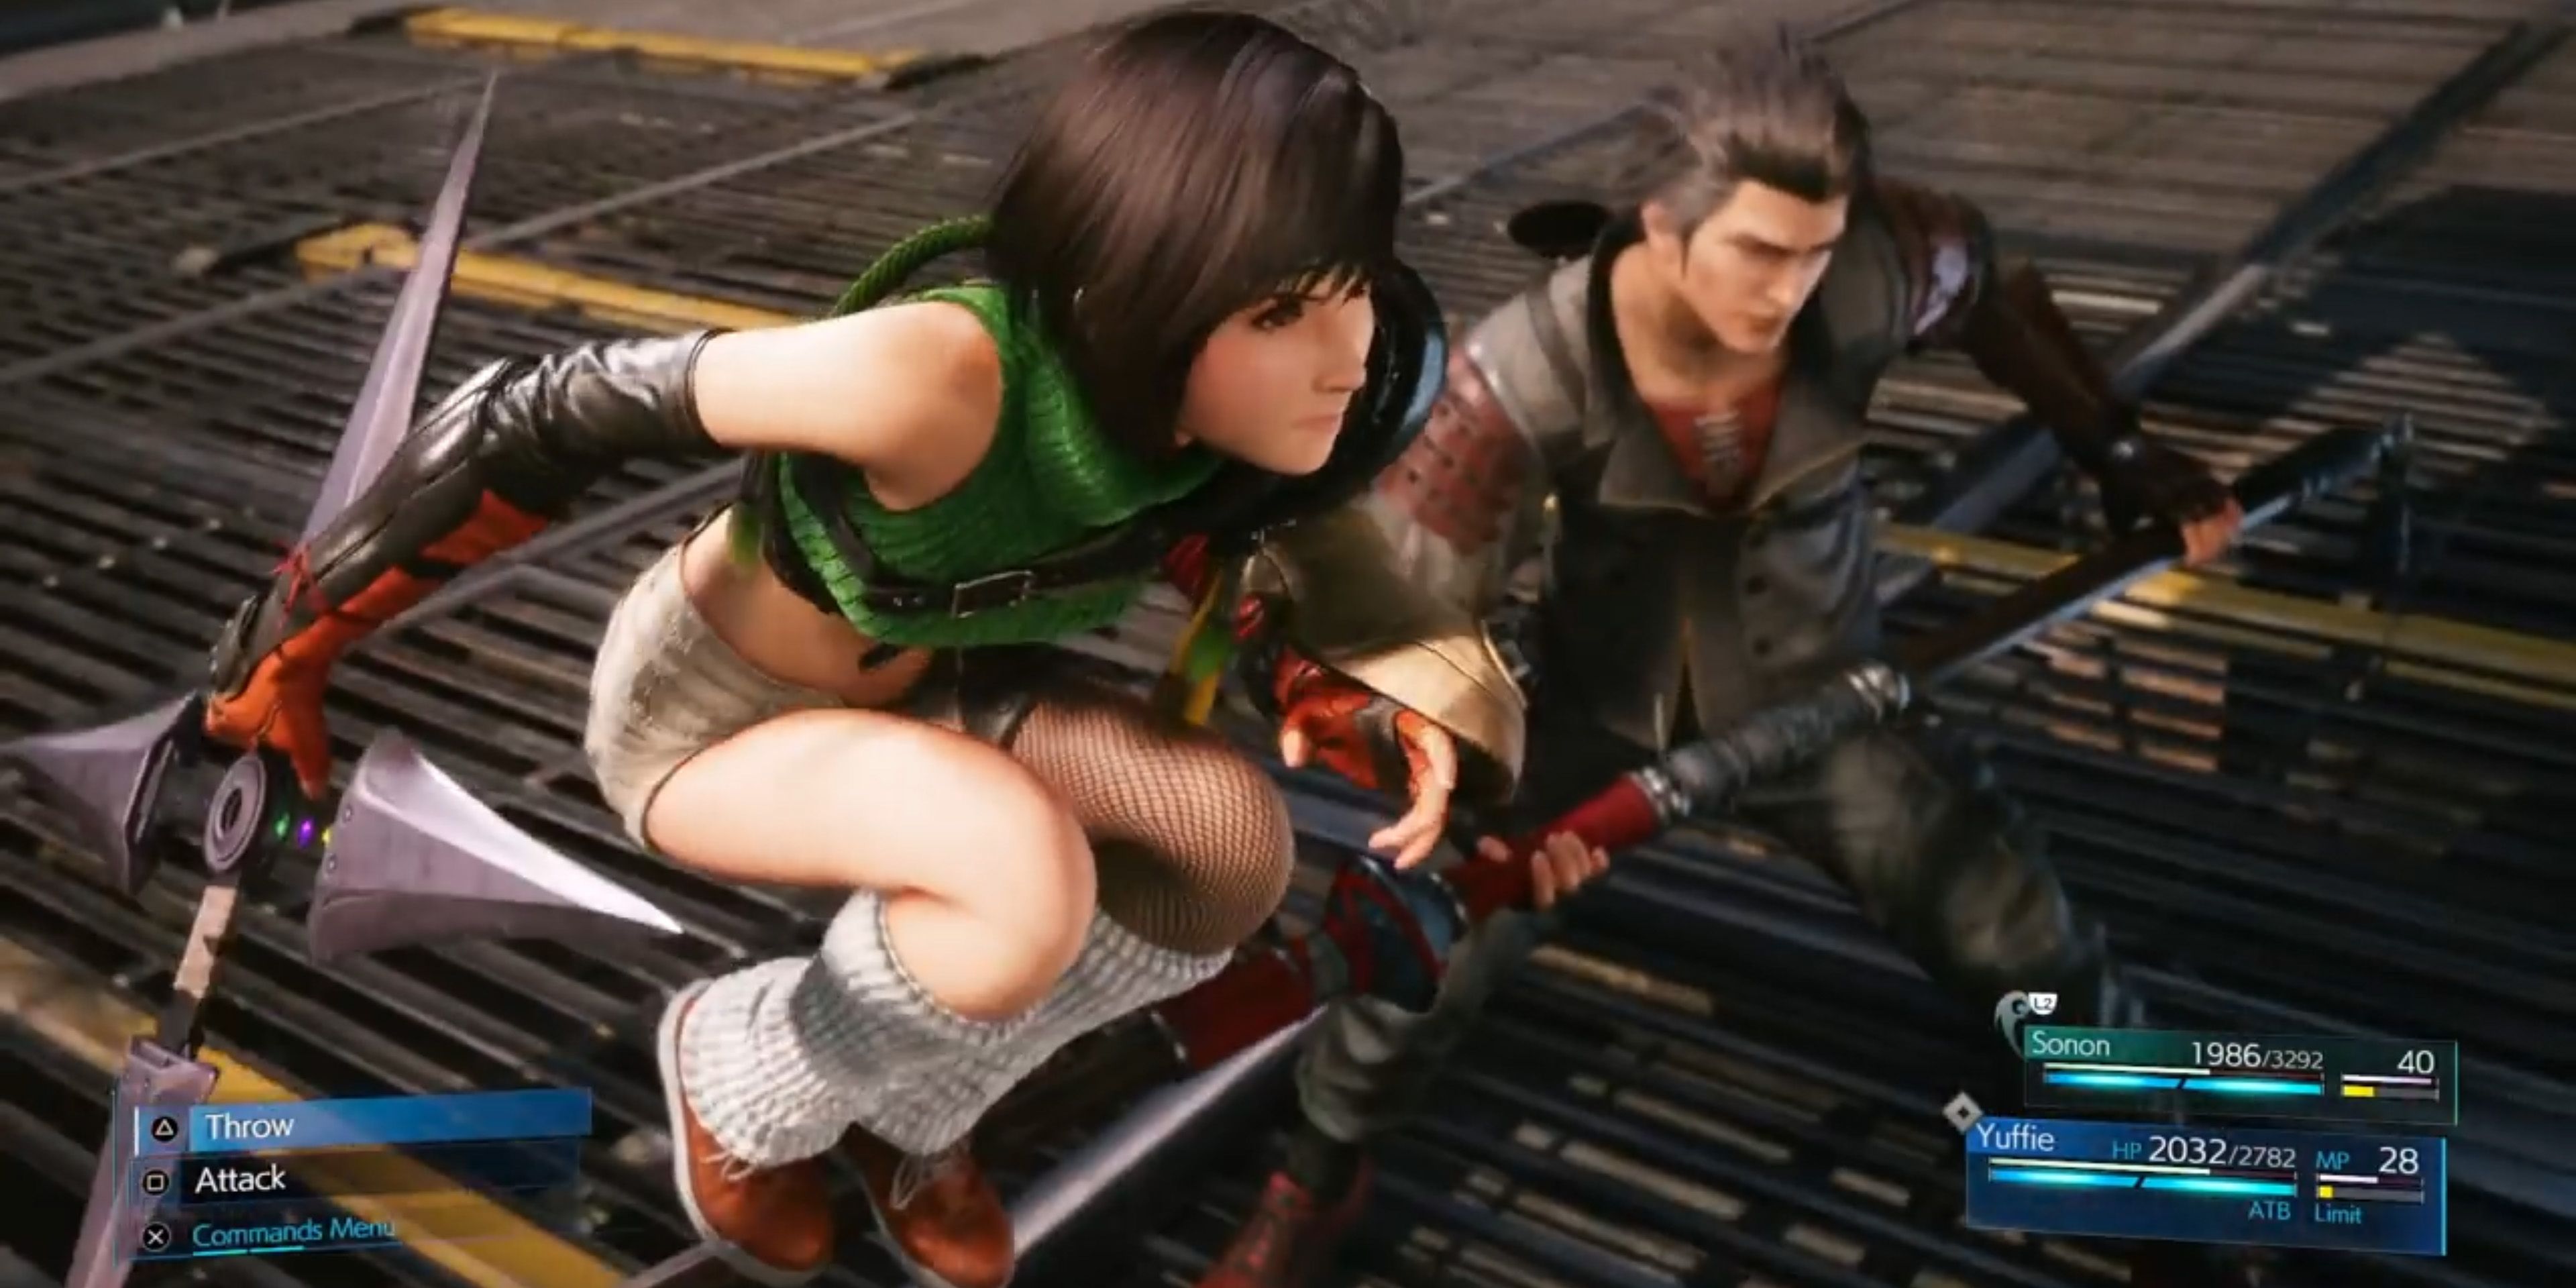 Yuffie and Sonon work together in combat; as shown in the trailer for Final Fantasy VII Remake Intergrade